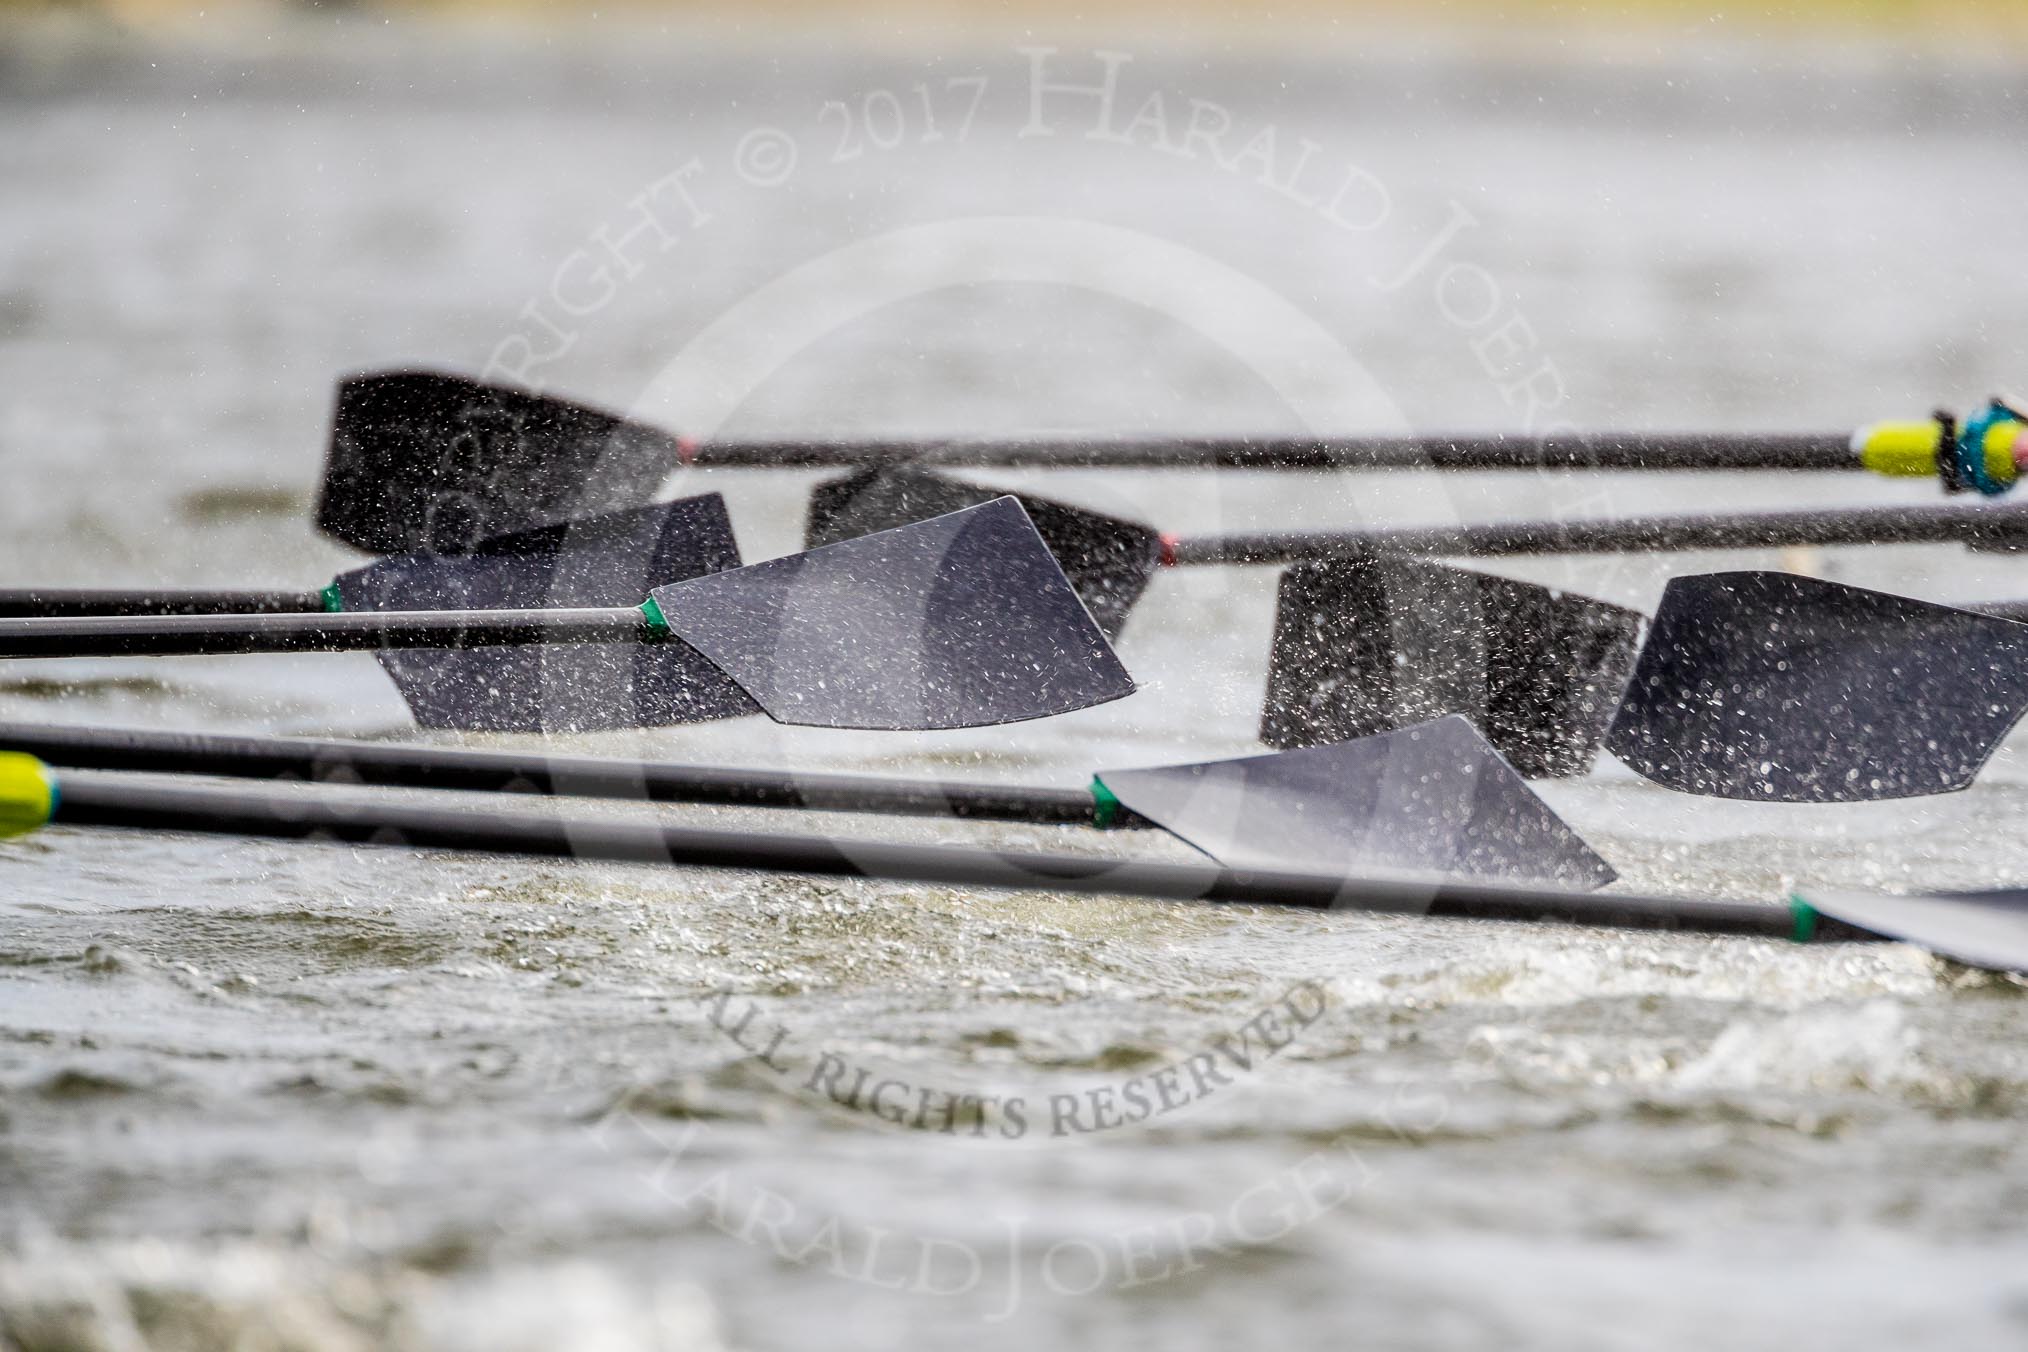 The Cancer Research UK Boat Race season 2017 - Women's Boat Race Fixture OUWBC vs Molesey BC: Molesey and OUWBC getting a bit close, with almost overlapping oars.
River Thames between Putney Bridge and Mortlake,
London SW15,

United Kingdom,
on 19 March 2017 at 16:21, image #134